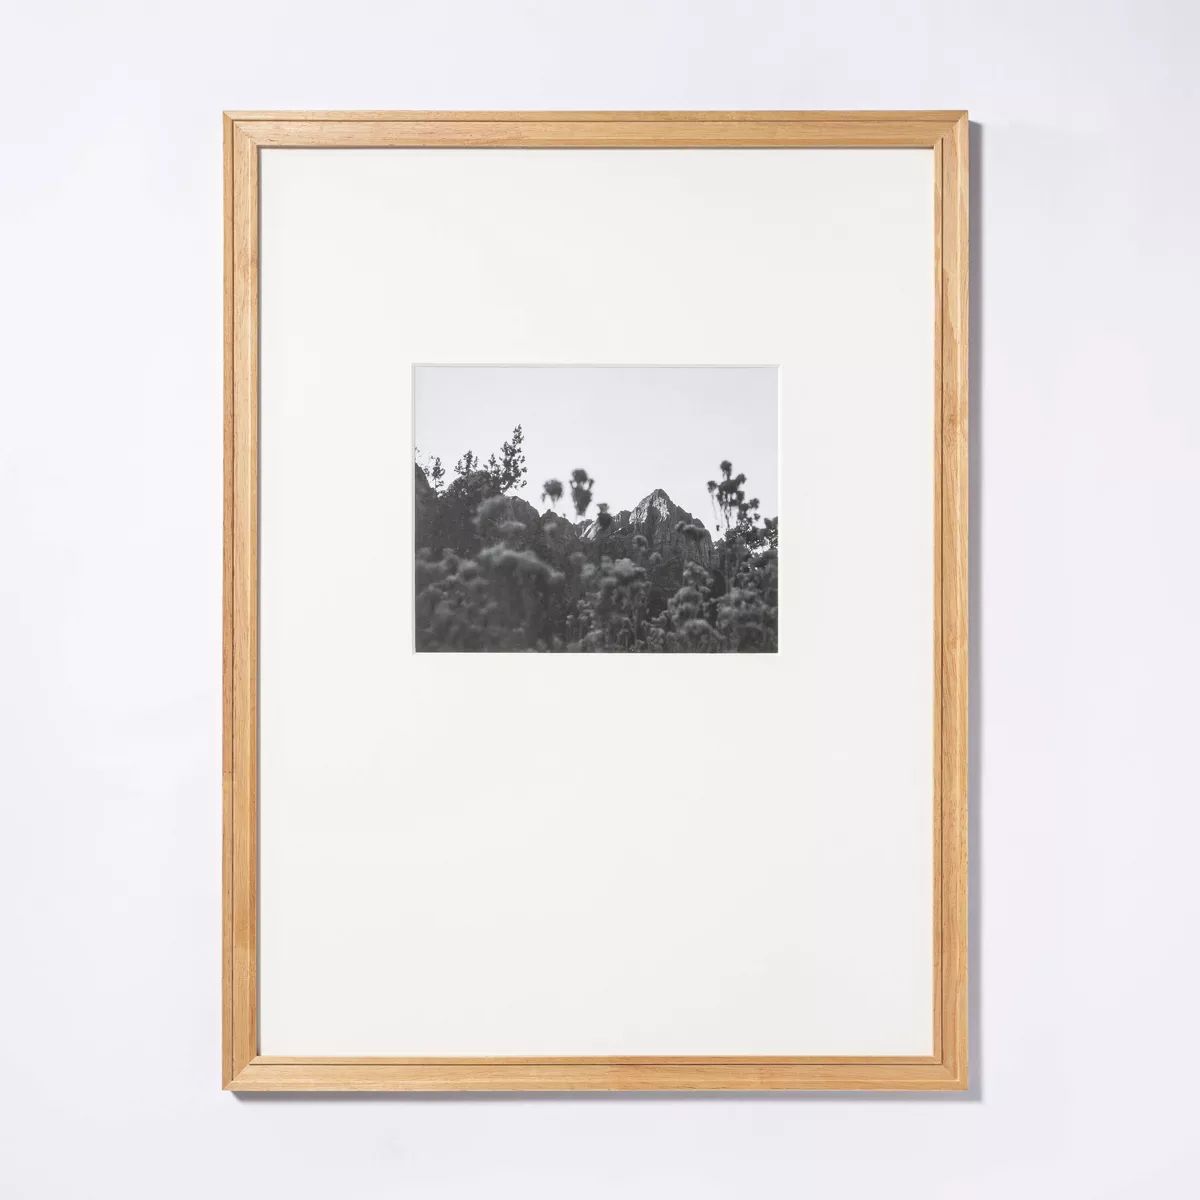 18" x 24" Matted to 8" x 10" Gallery Frame Natural Wood - Threshold™ designed with Studio McGee | Target